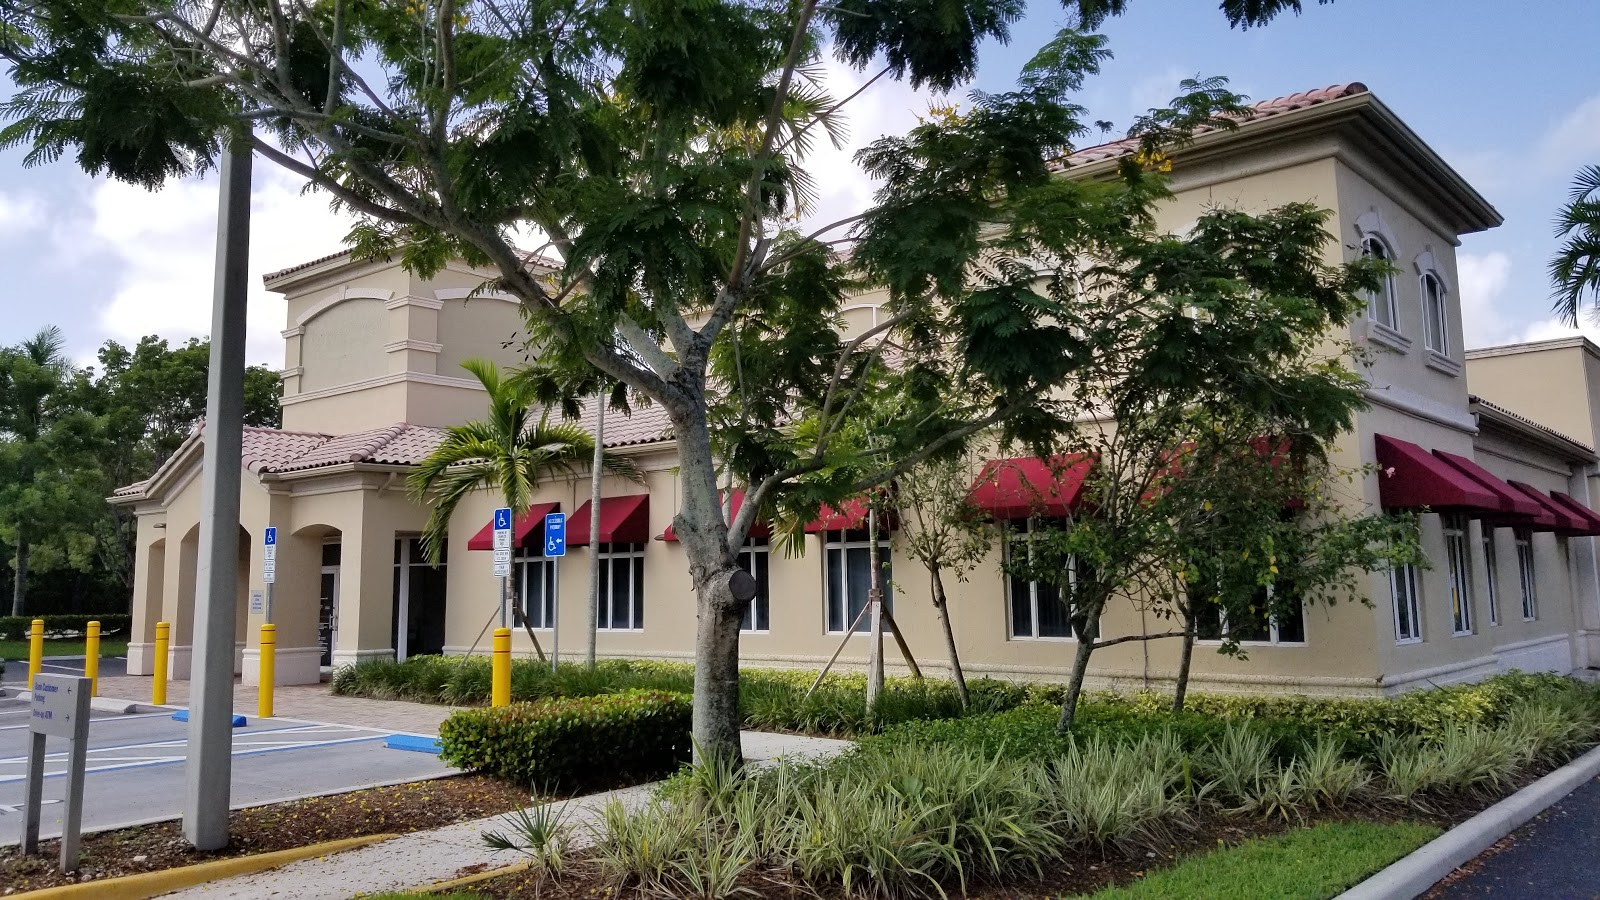 Bank of America (with Drive-thru ATM) » Bank in Weston FL